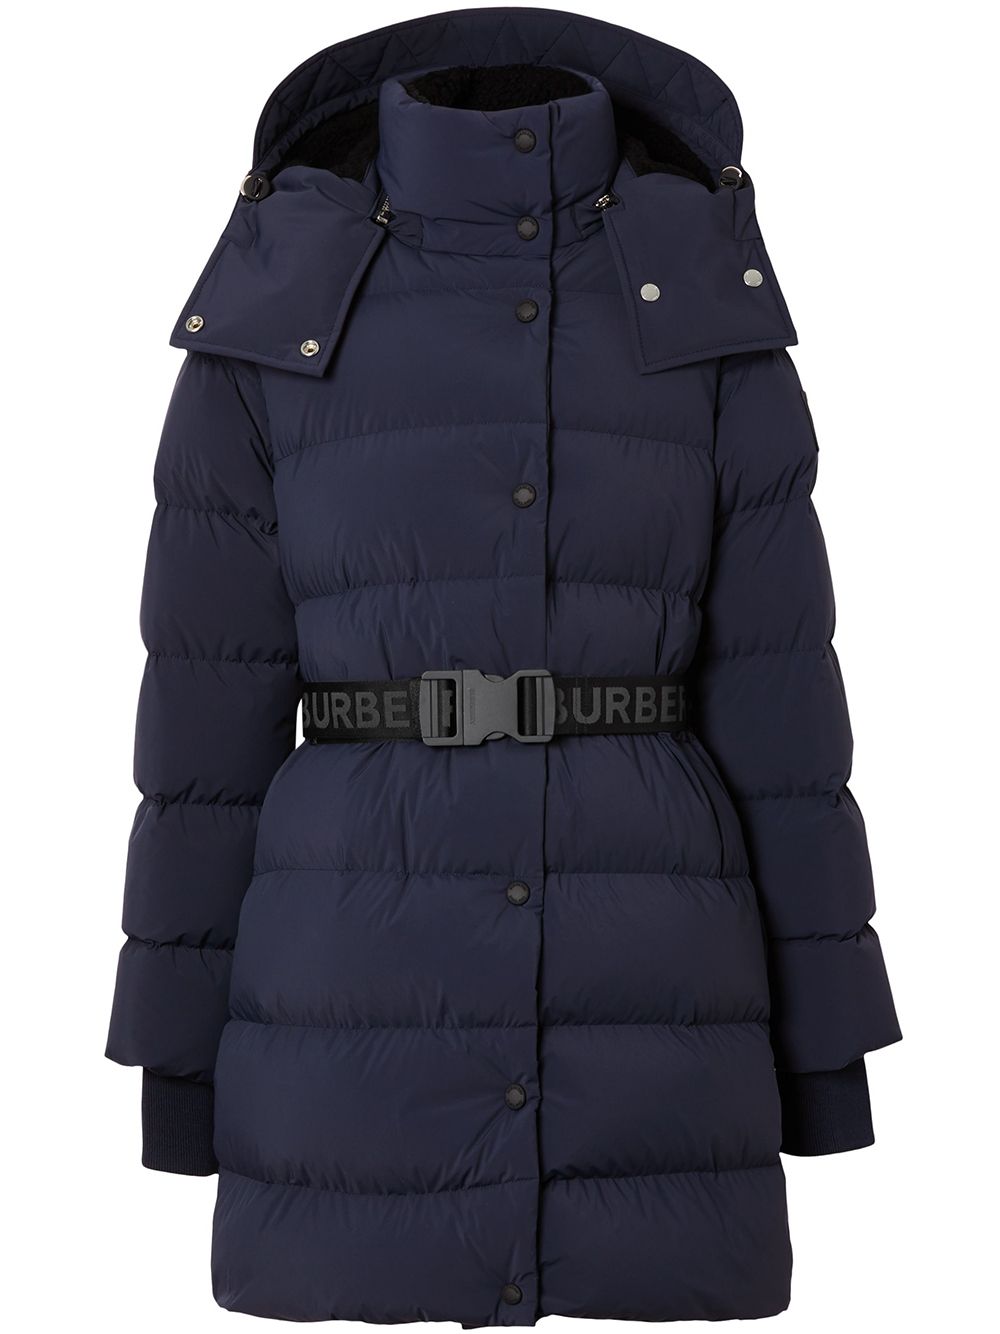 BURBERRY DETACHABLE HOOD BELTED PUFFER JACKET